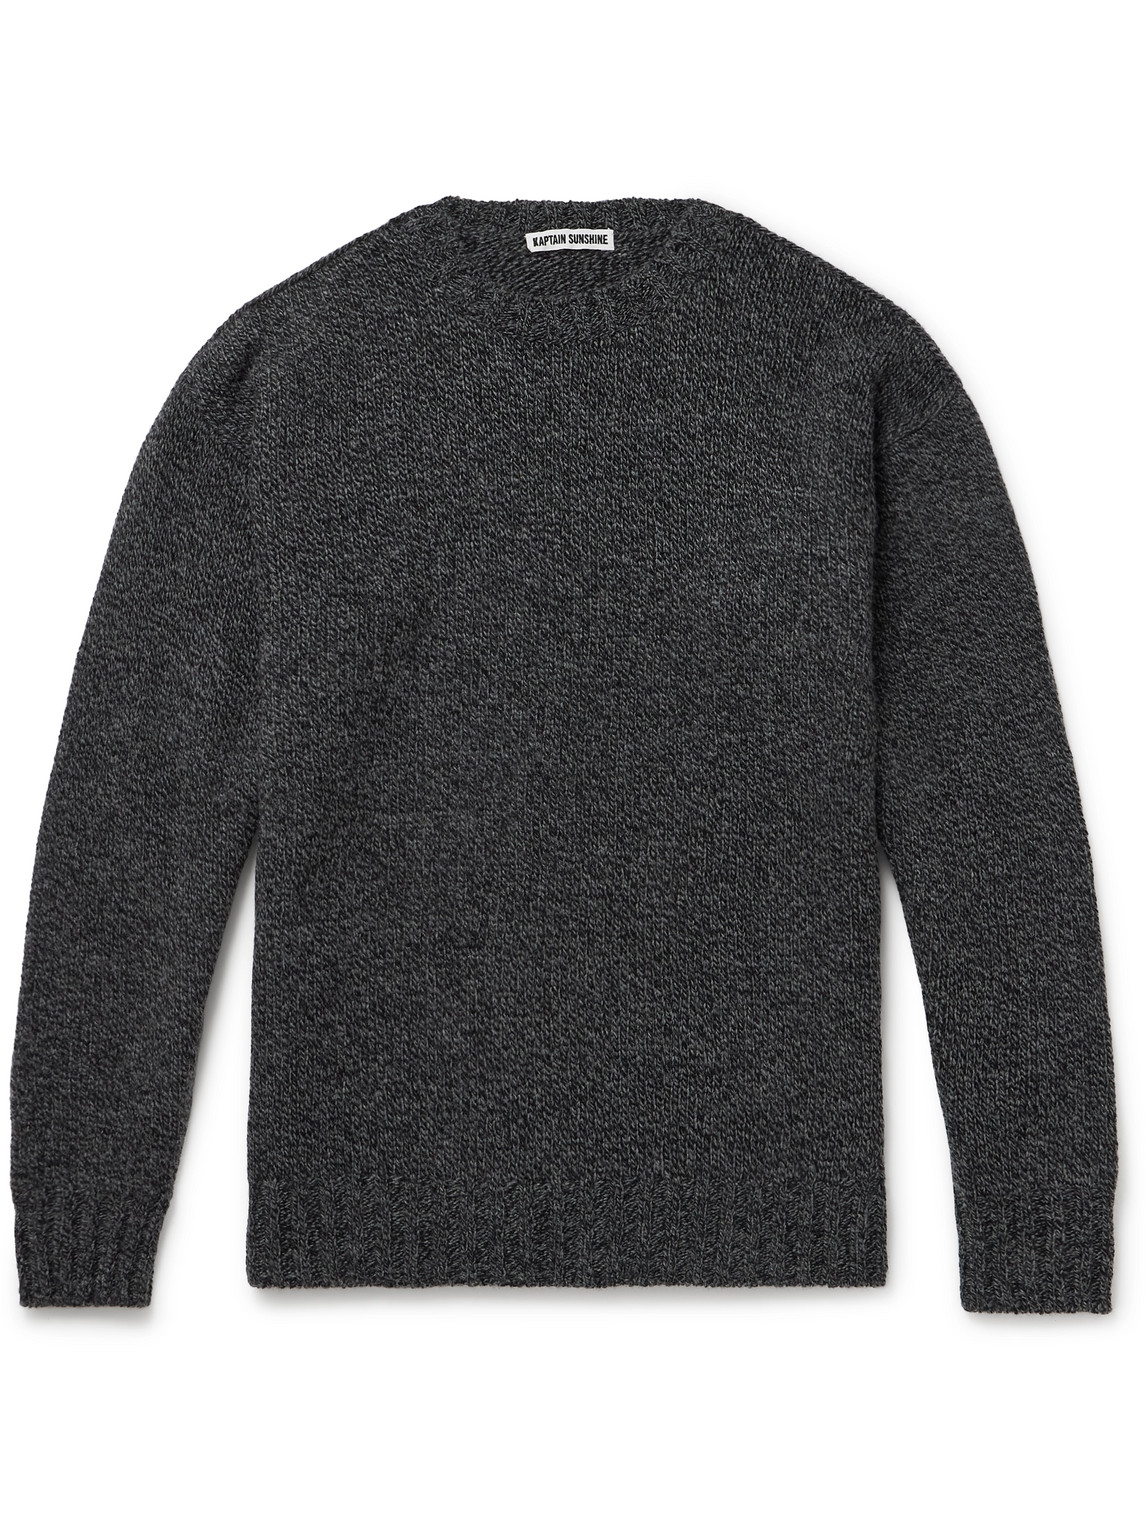 Throwing Fits Wool Sweater